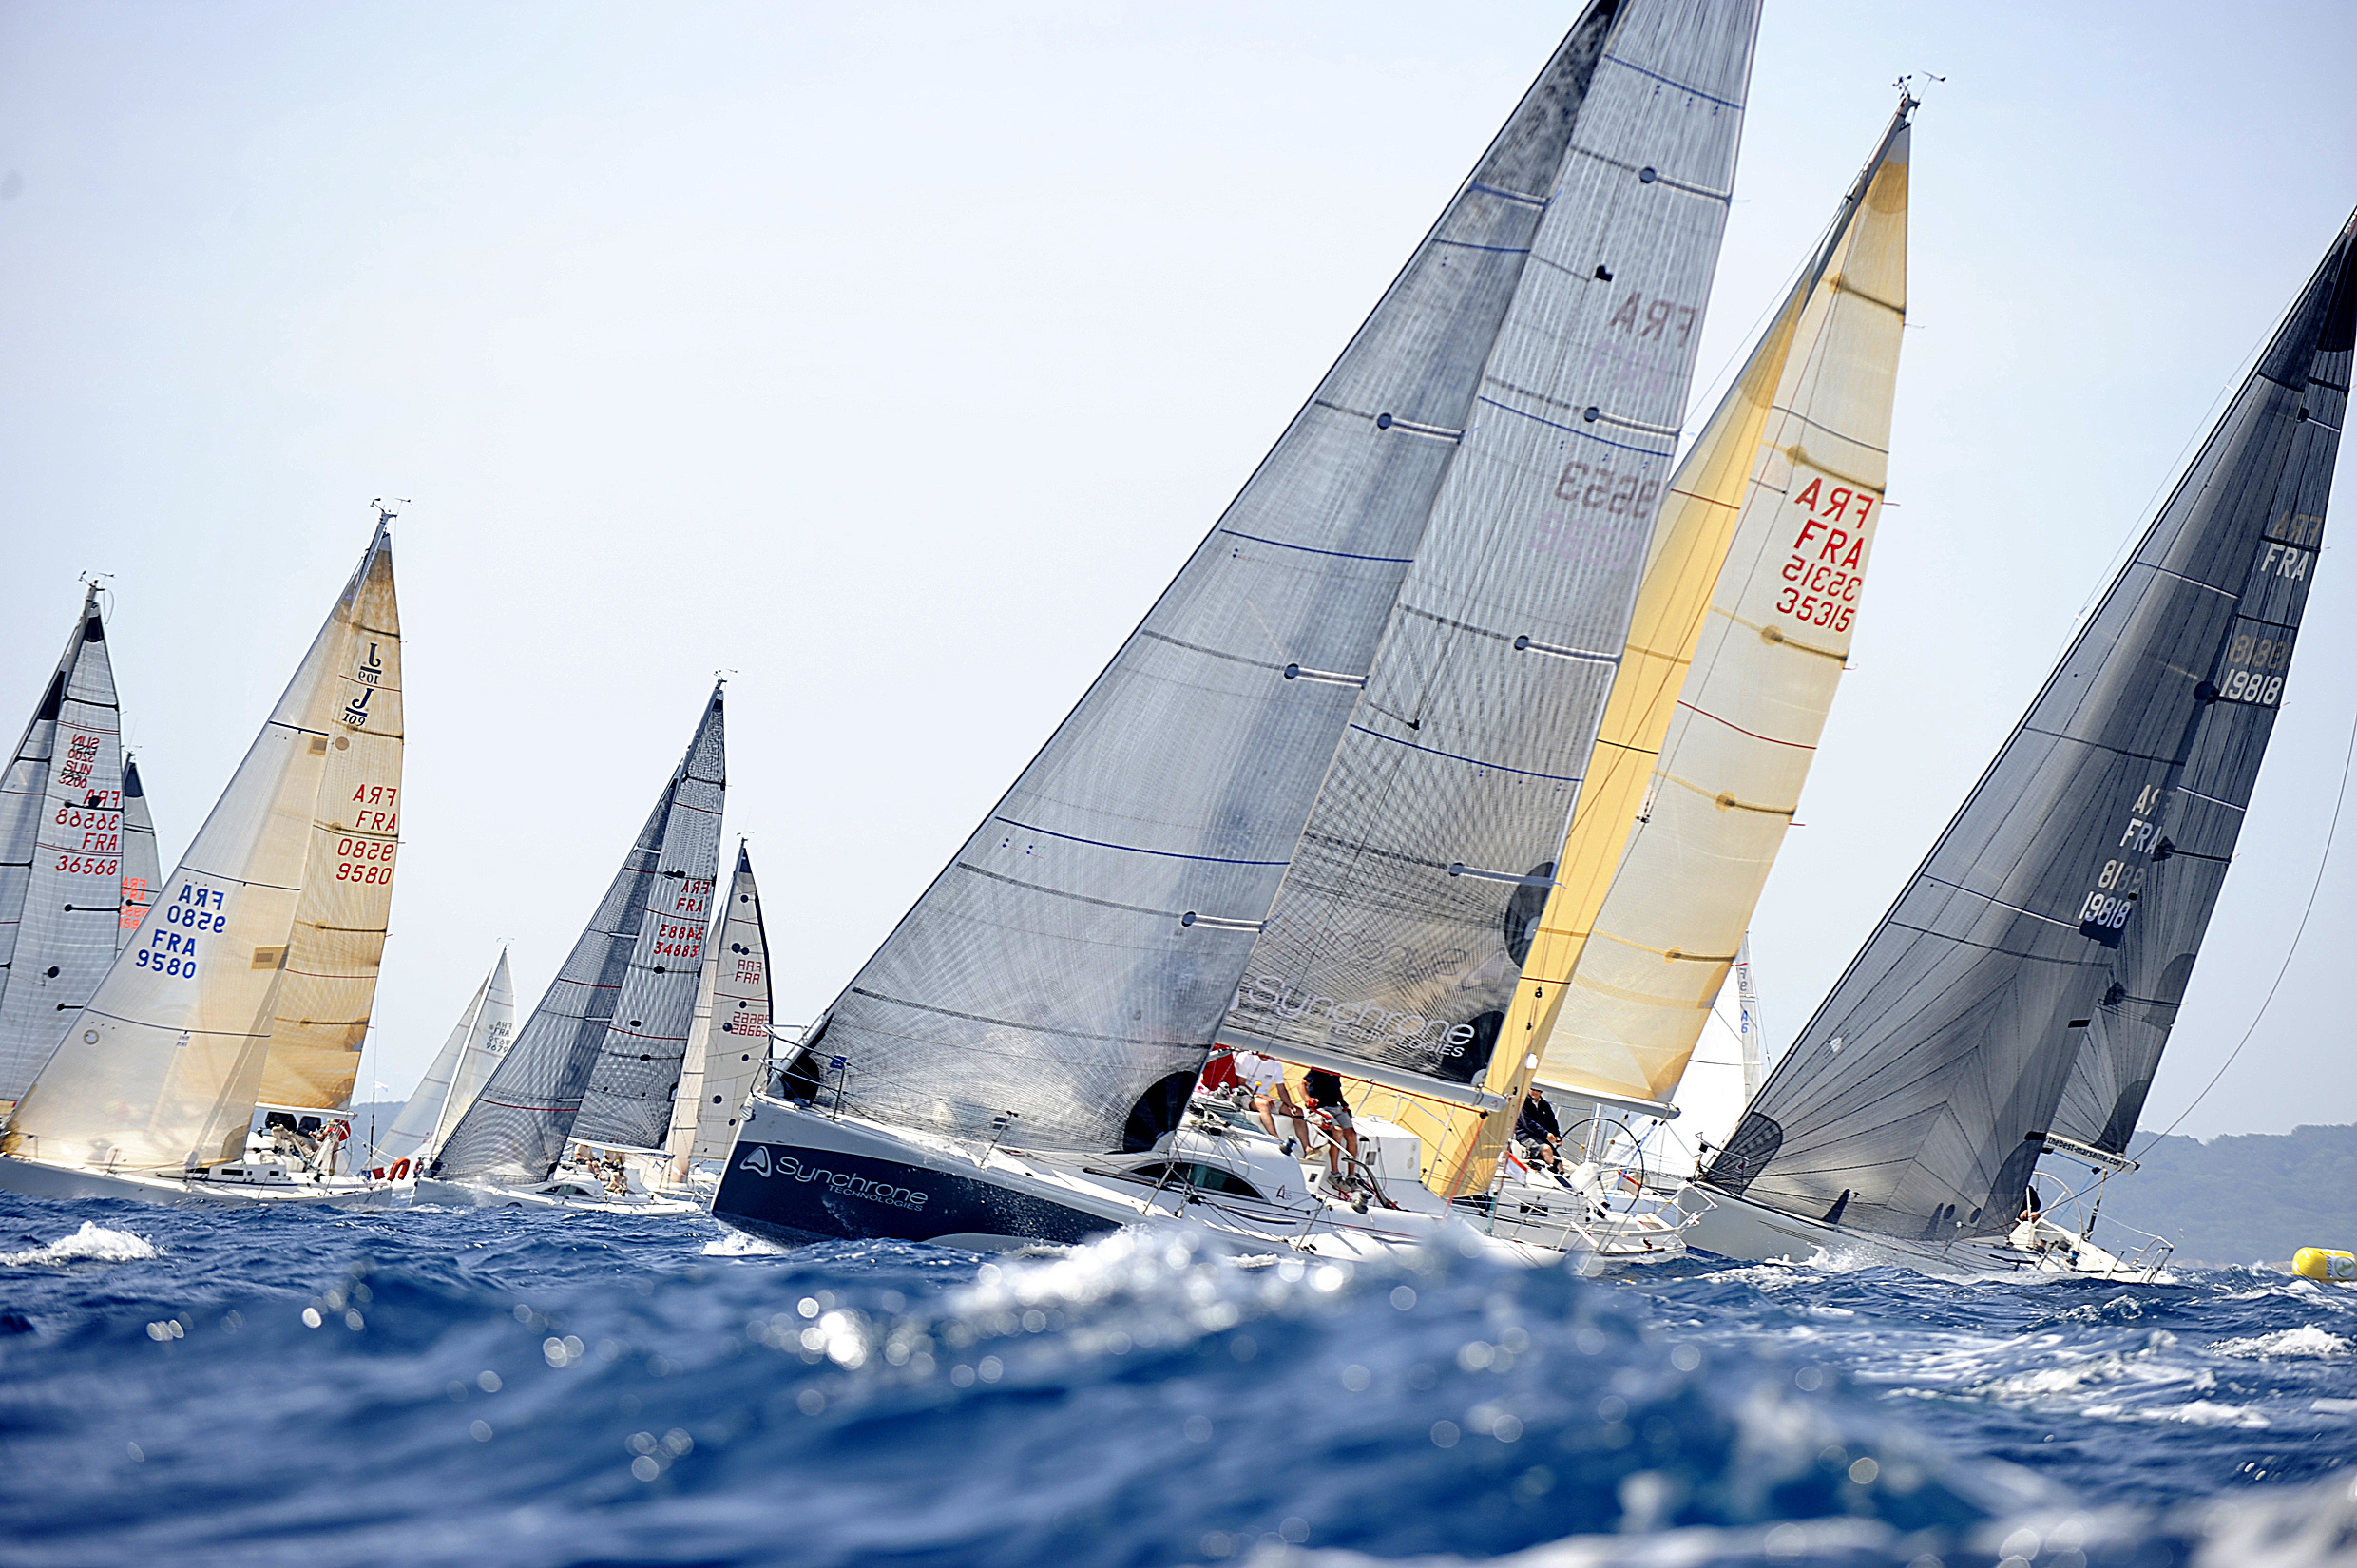 Yacht Racing: Porquerolle's race regatta, A sailing competition, Tournament on the water. 2480x1650 HD Background.